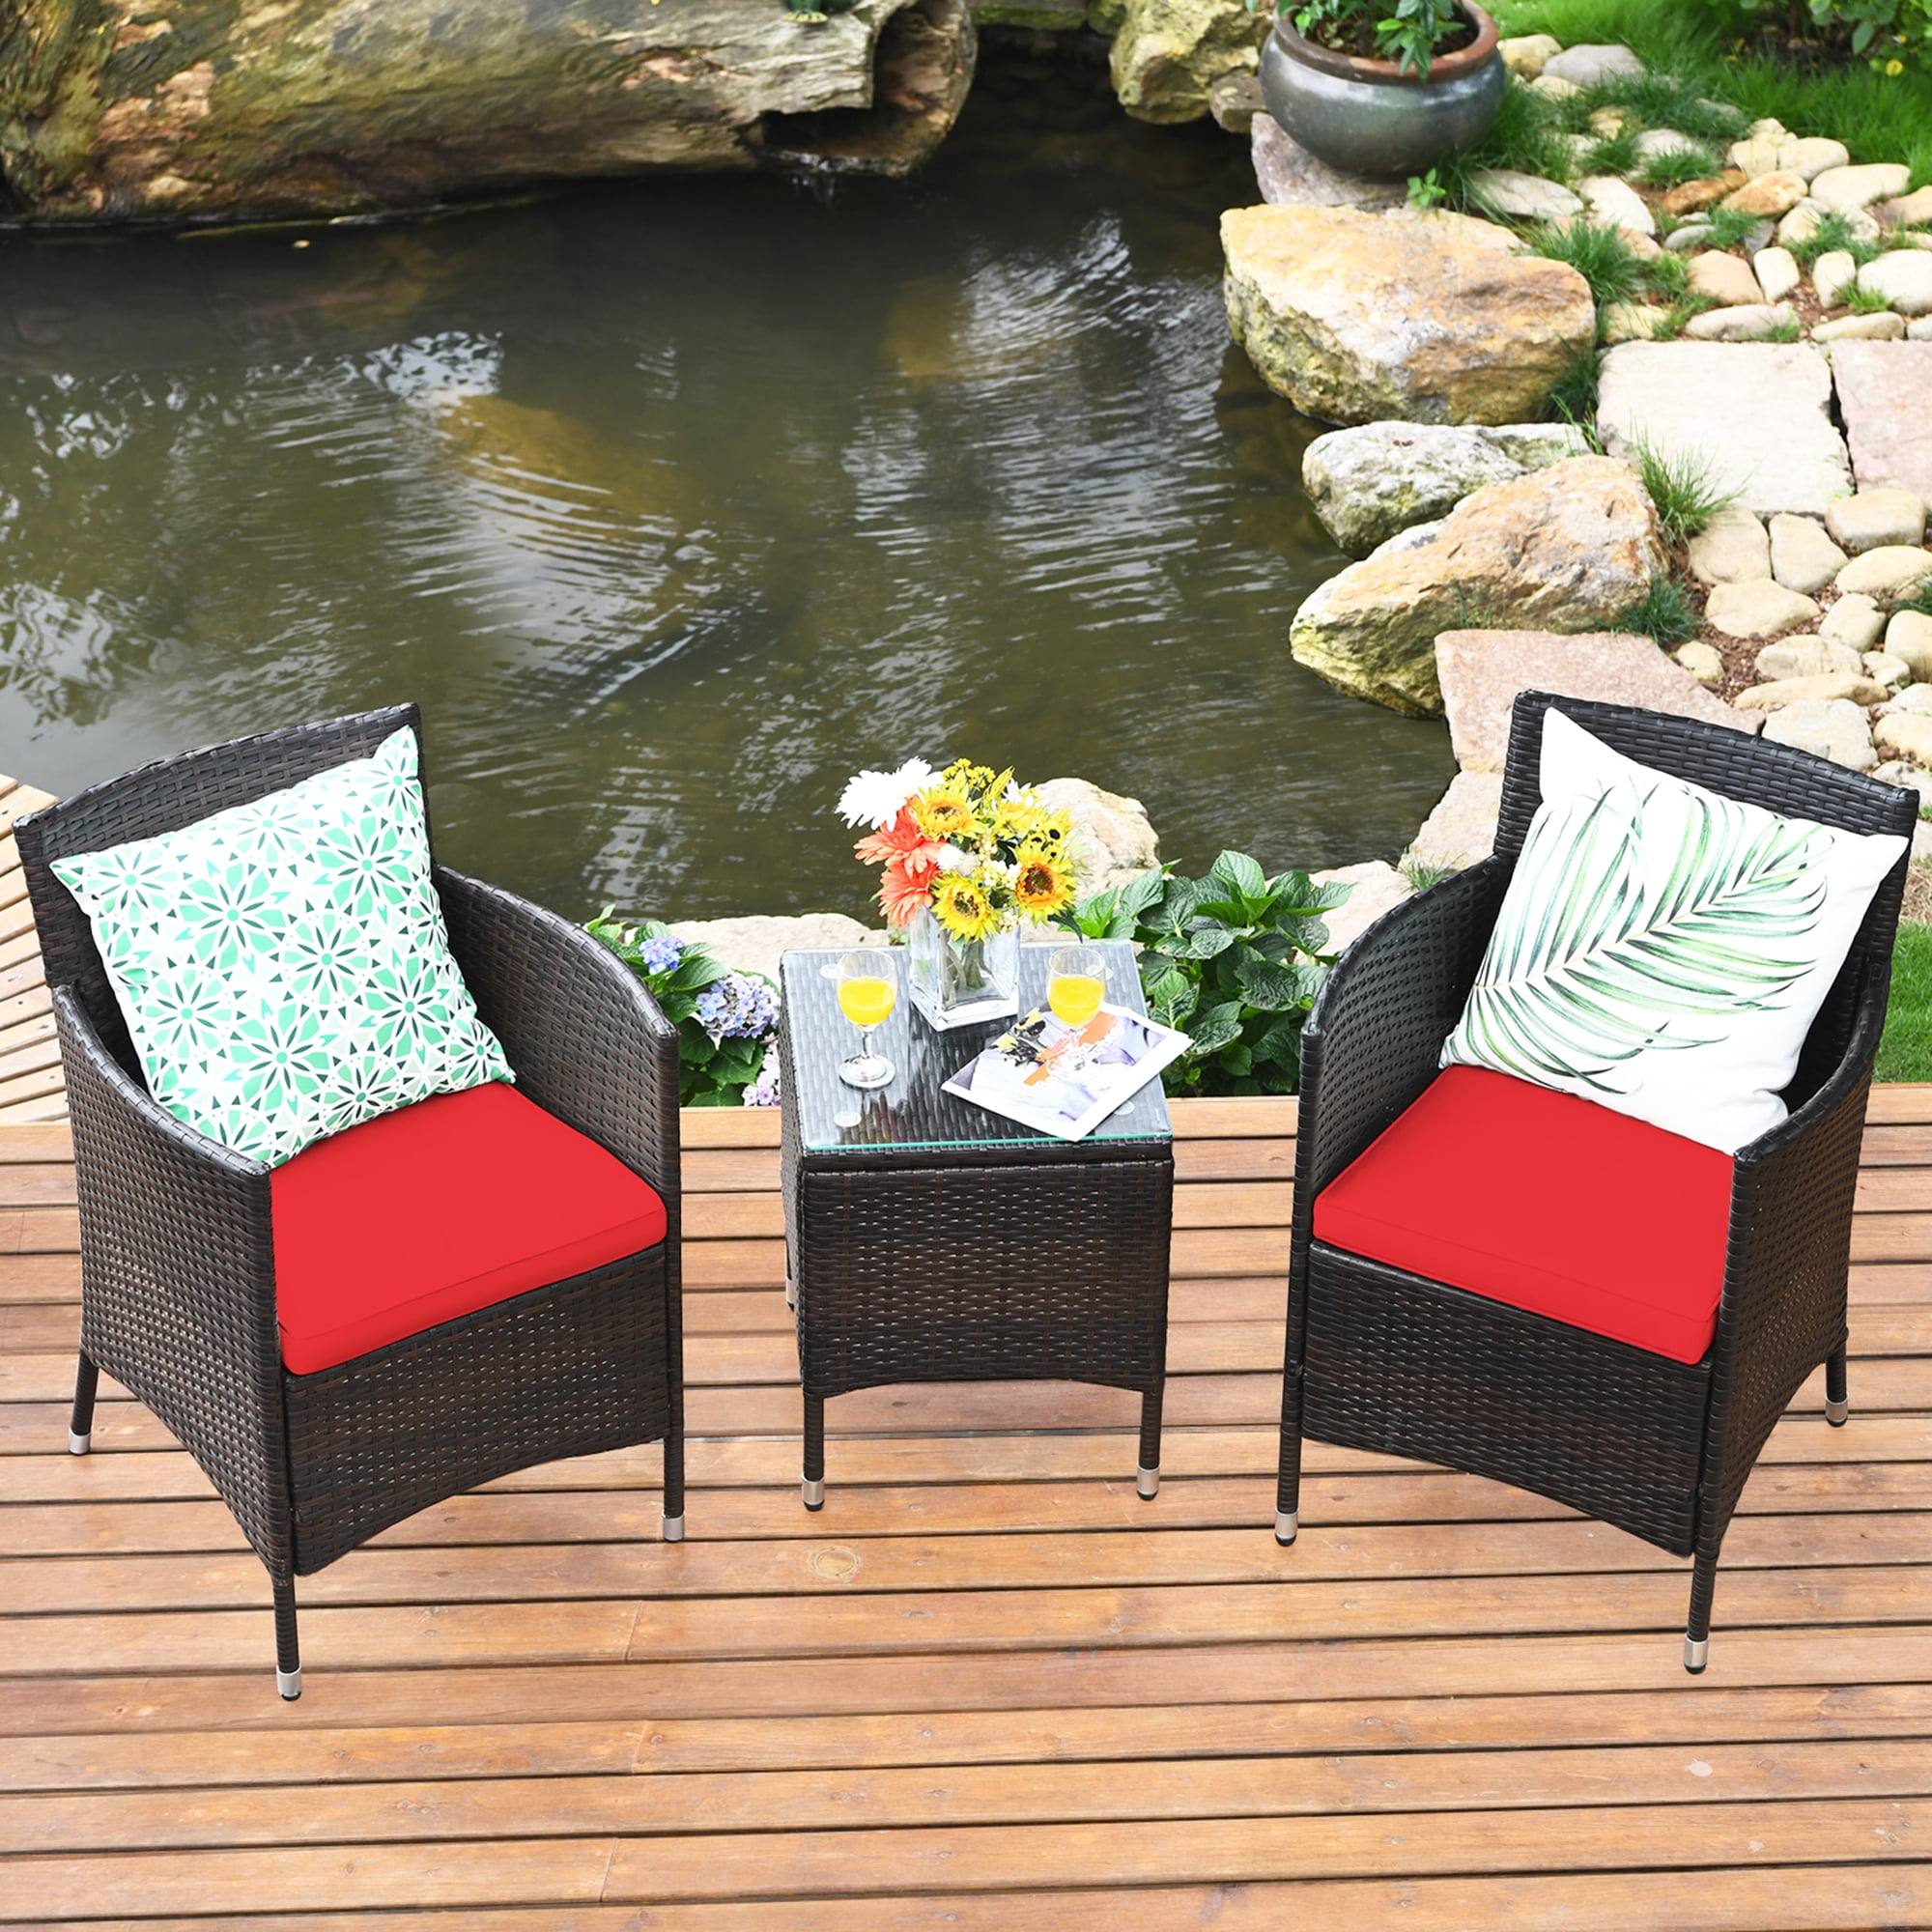 Patio Outdoor Rattan Furniture Set, Jcpenney Outdoor Furniture Cushions